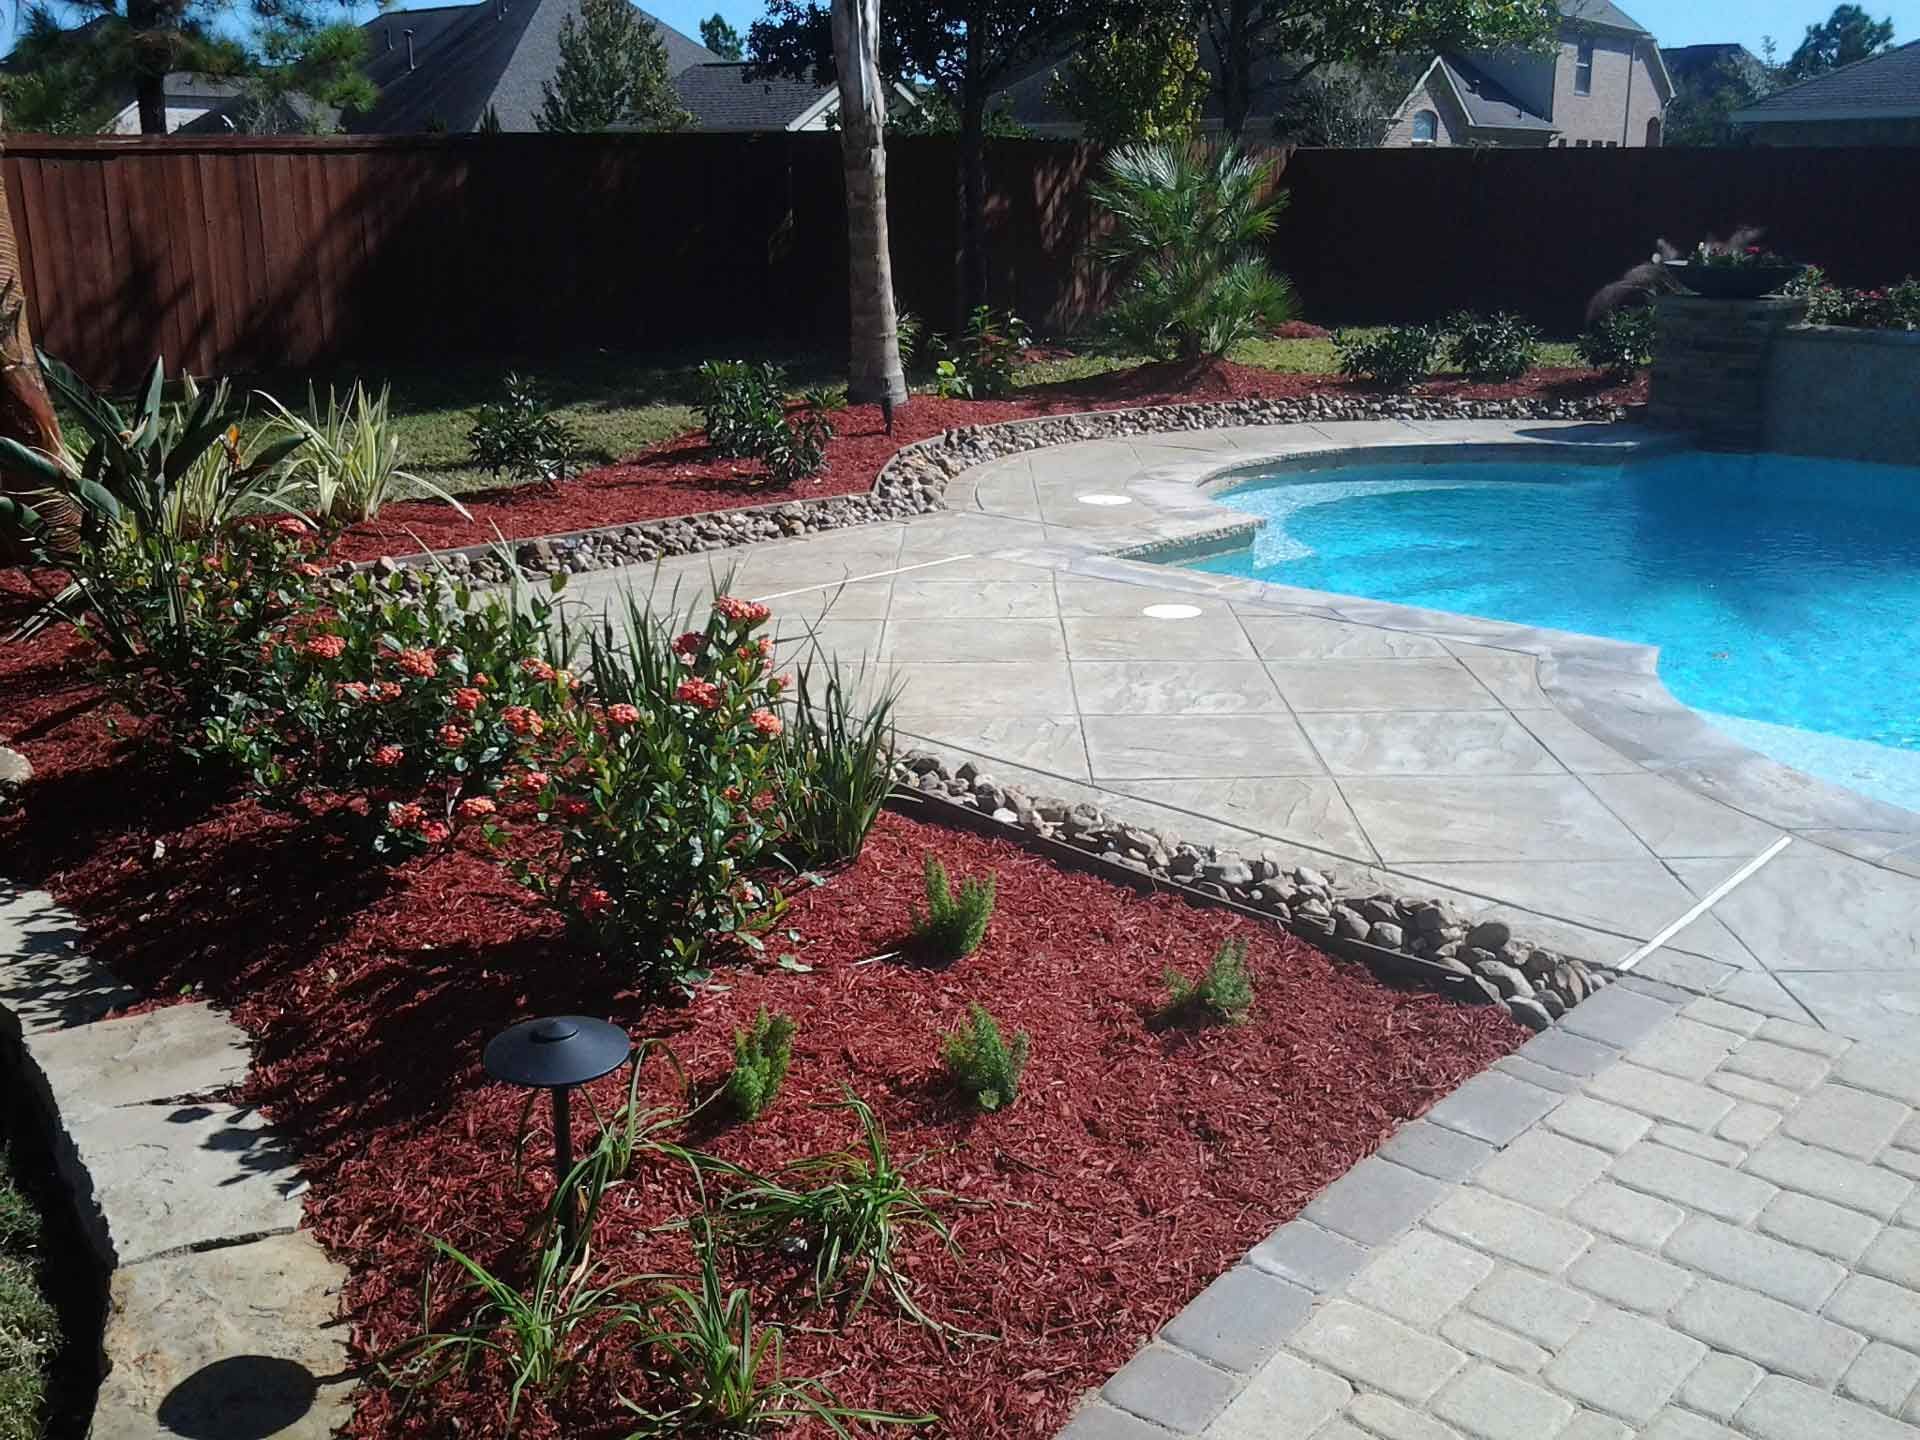 Pool area with a red gravel landscaping and planting